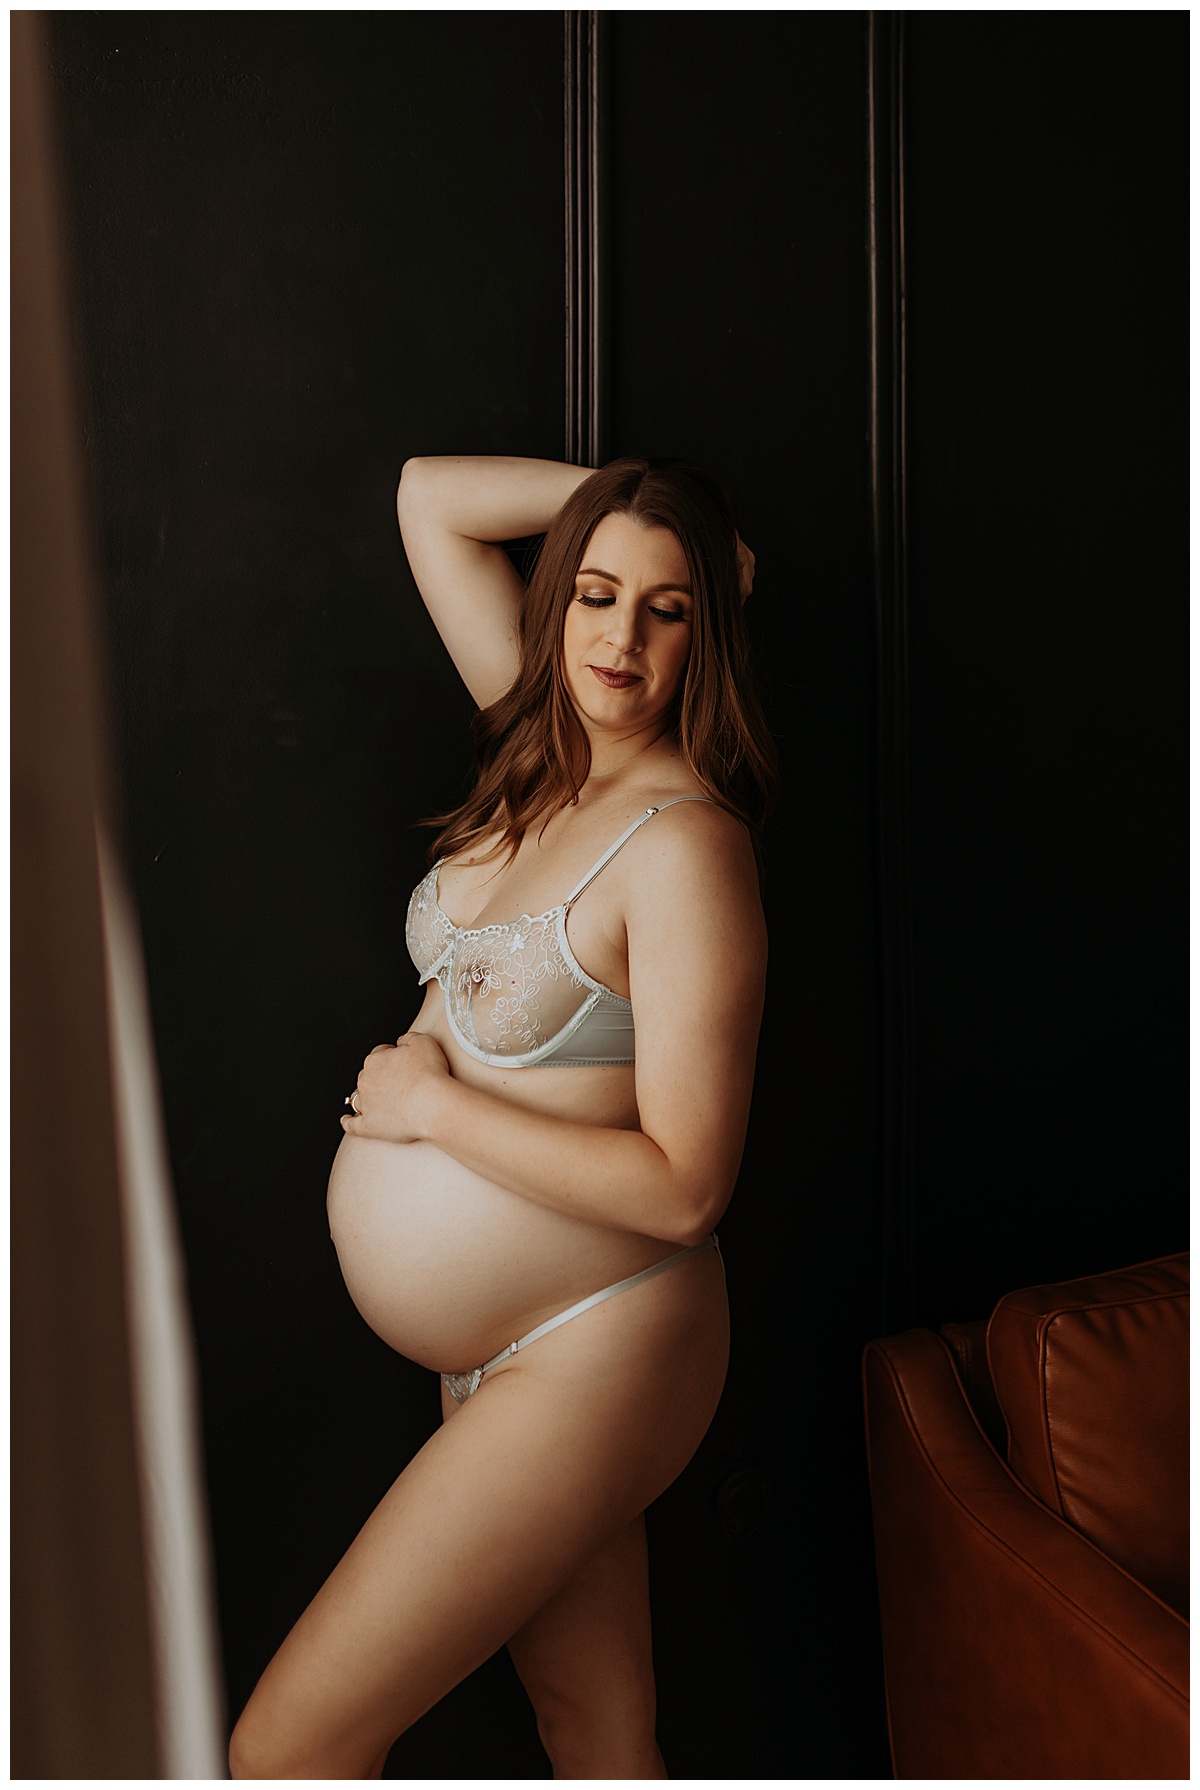 Mama grabs belly for Maternity Boudoir session